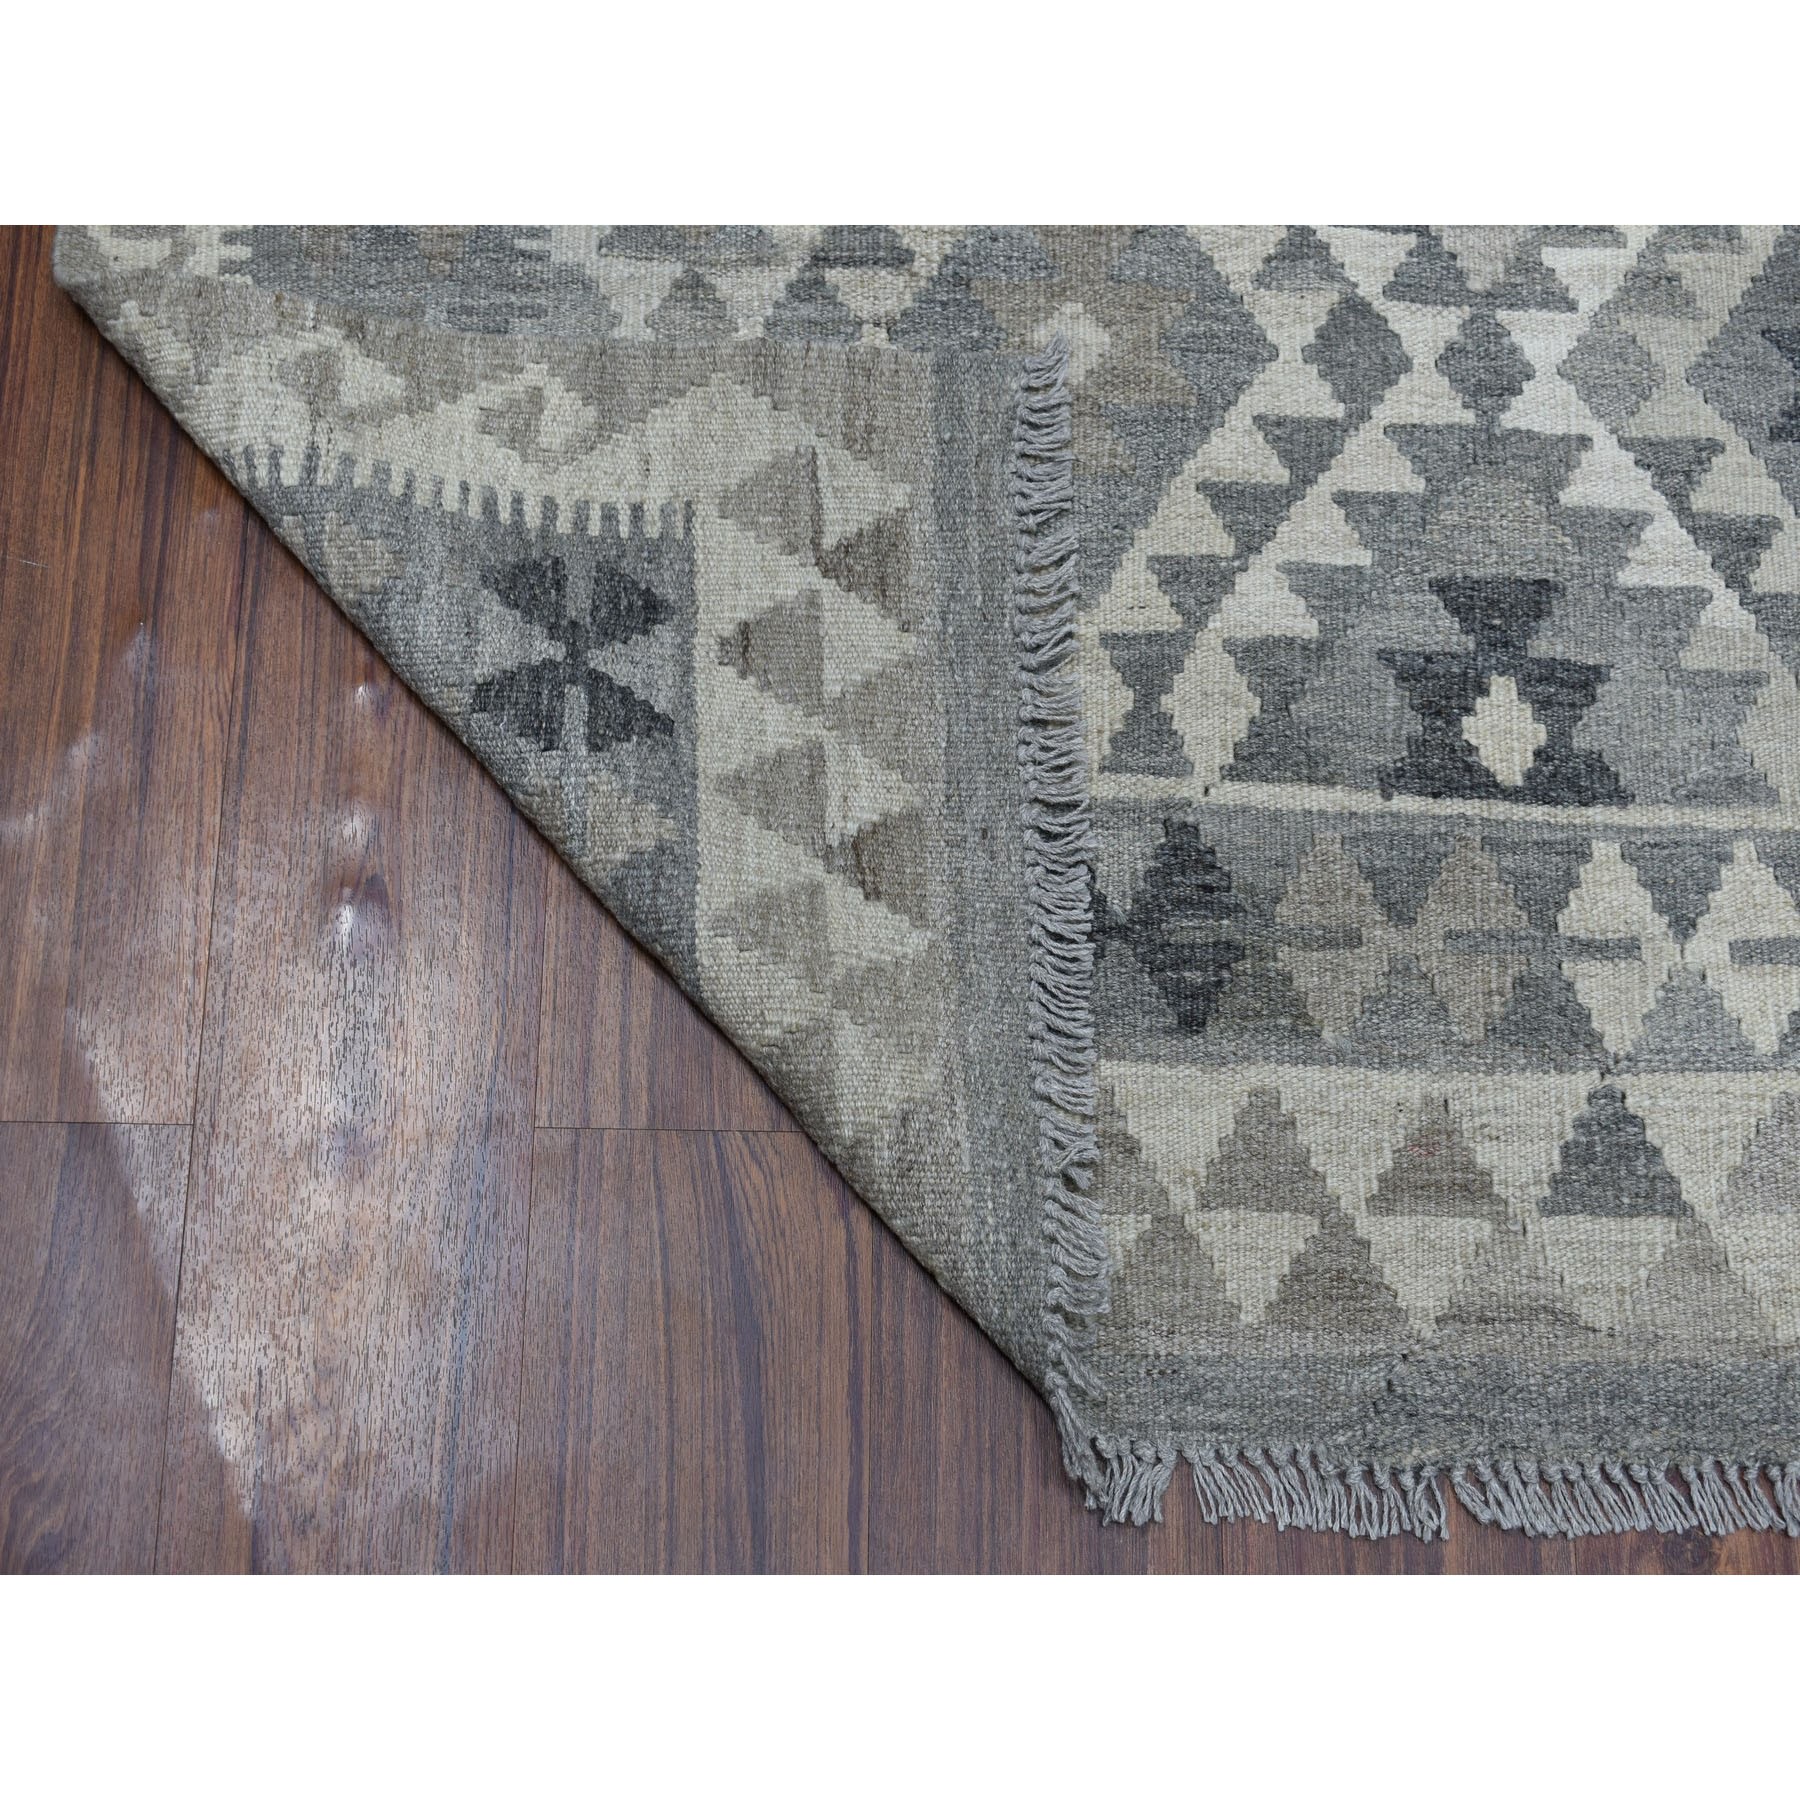 5-10 x8- Undyed Natural Wool Afghan Kilim Reversible Hand Woven Oriental Rug 